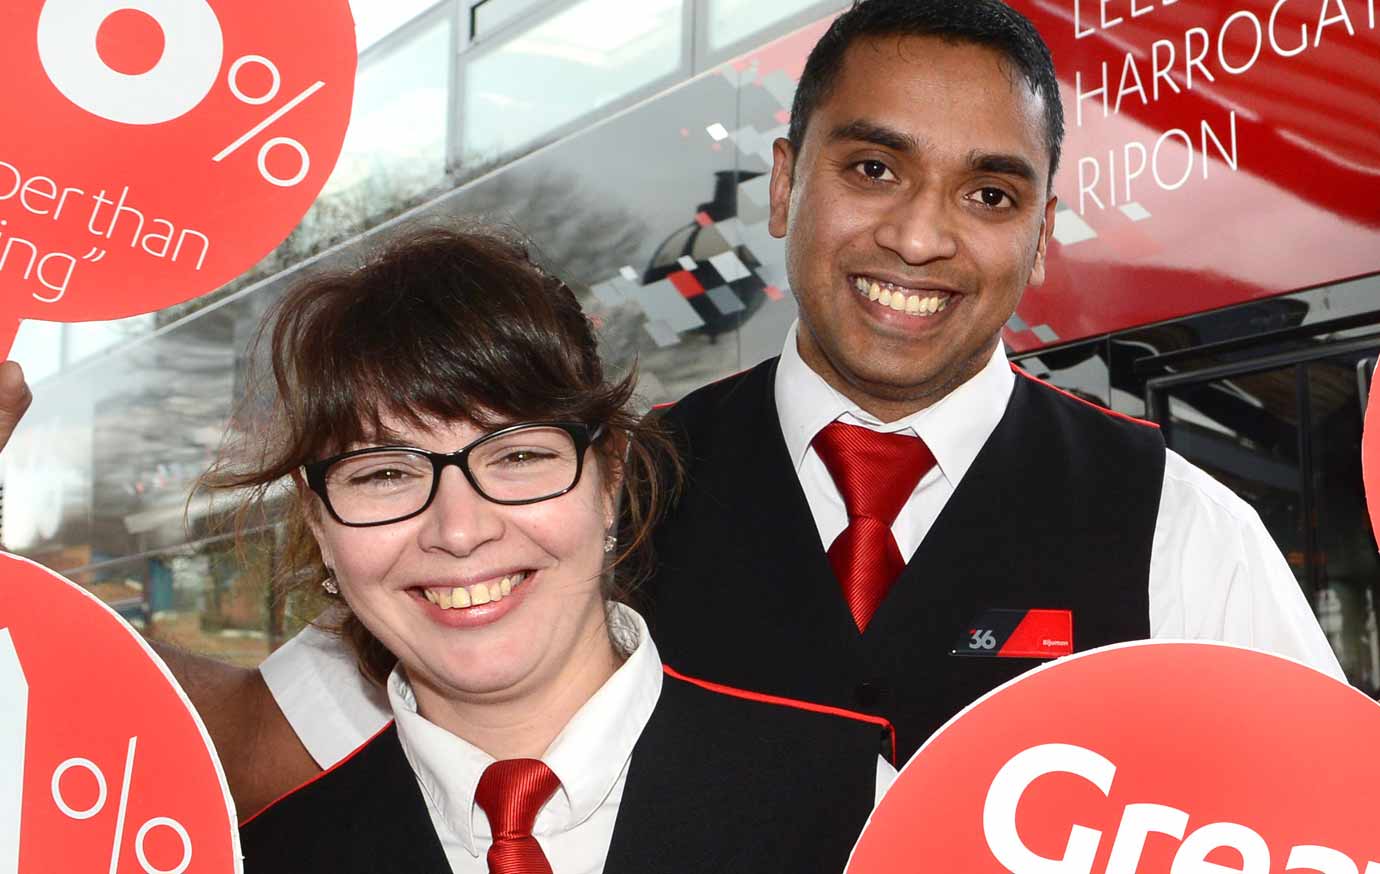 36 drivers, Sandra Fernandes and Bijumon George and a 36 bus at Harrogate Bus Station